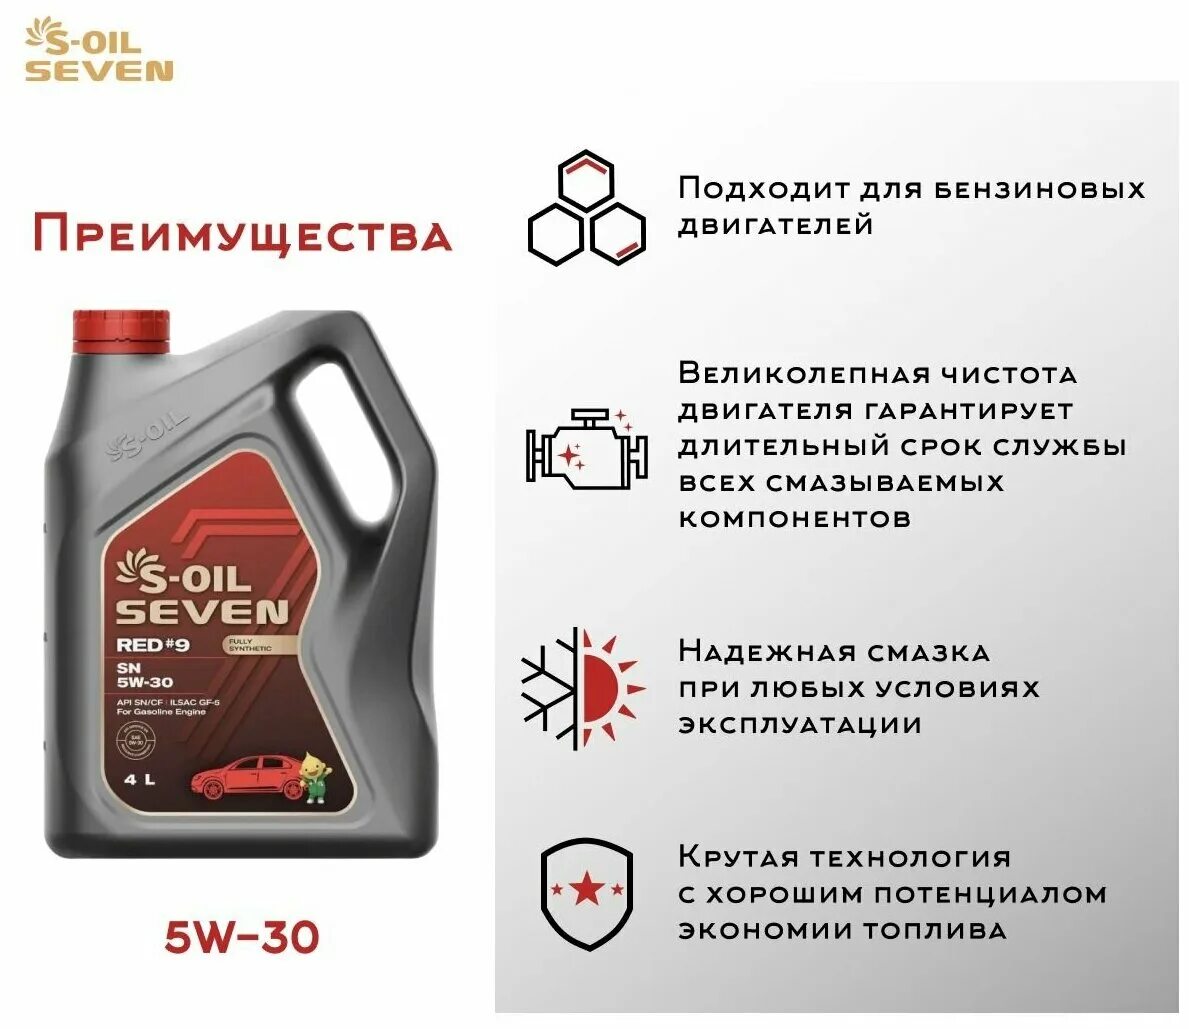 Масло 7 days. S Oil Seven Red 9 5w30. S-Oil Seven 5w30 SP. Моторное масло s-Oil Seven red9. Масло s-Oil Seven Red 9.